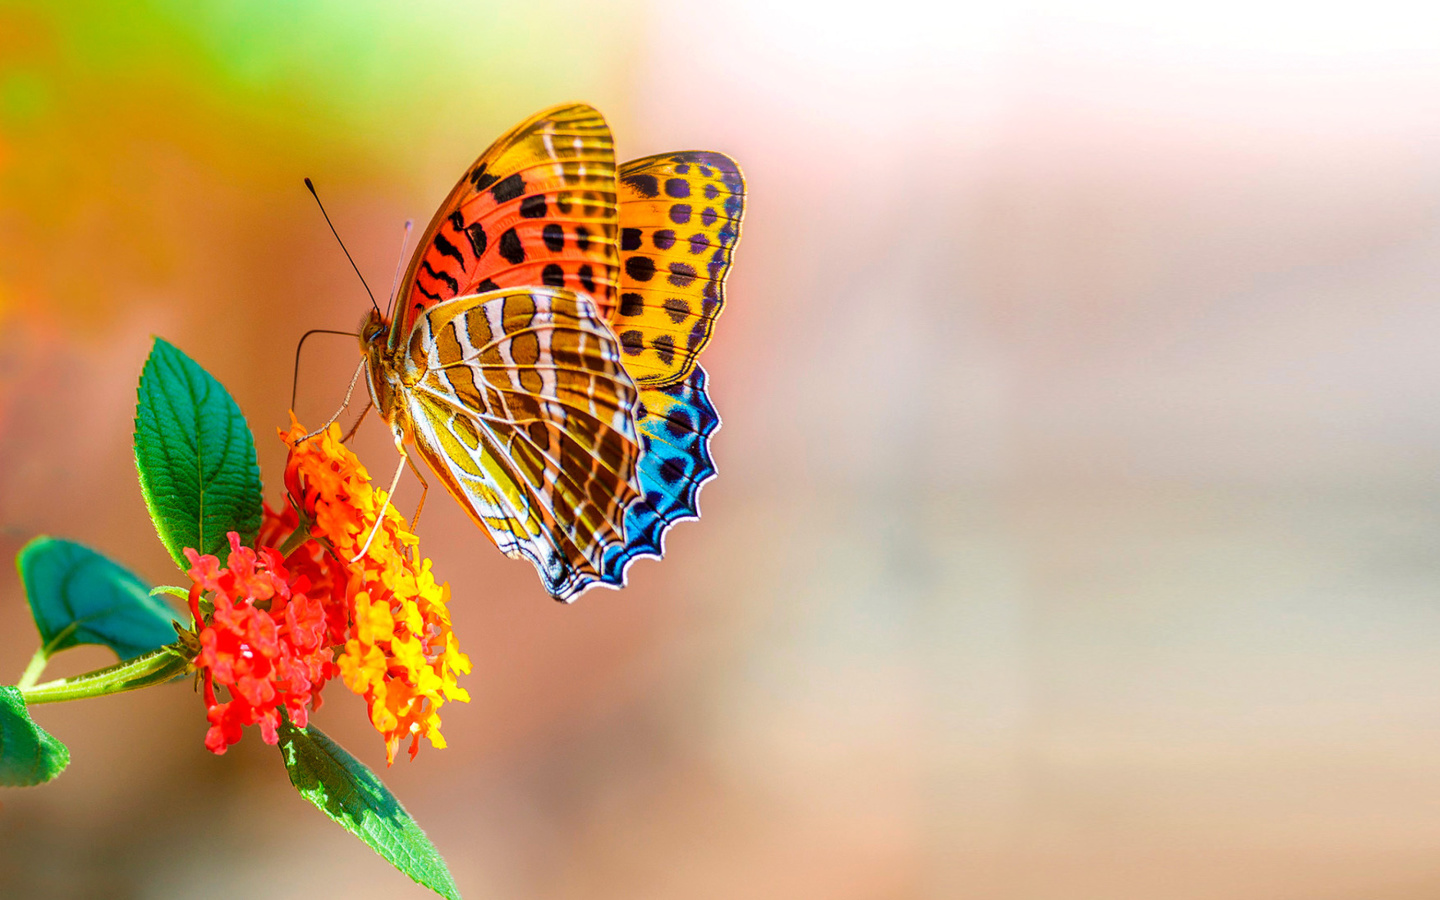 Colorful Animated Butterfly wallpaper 1440x900